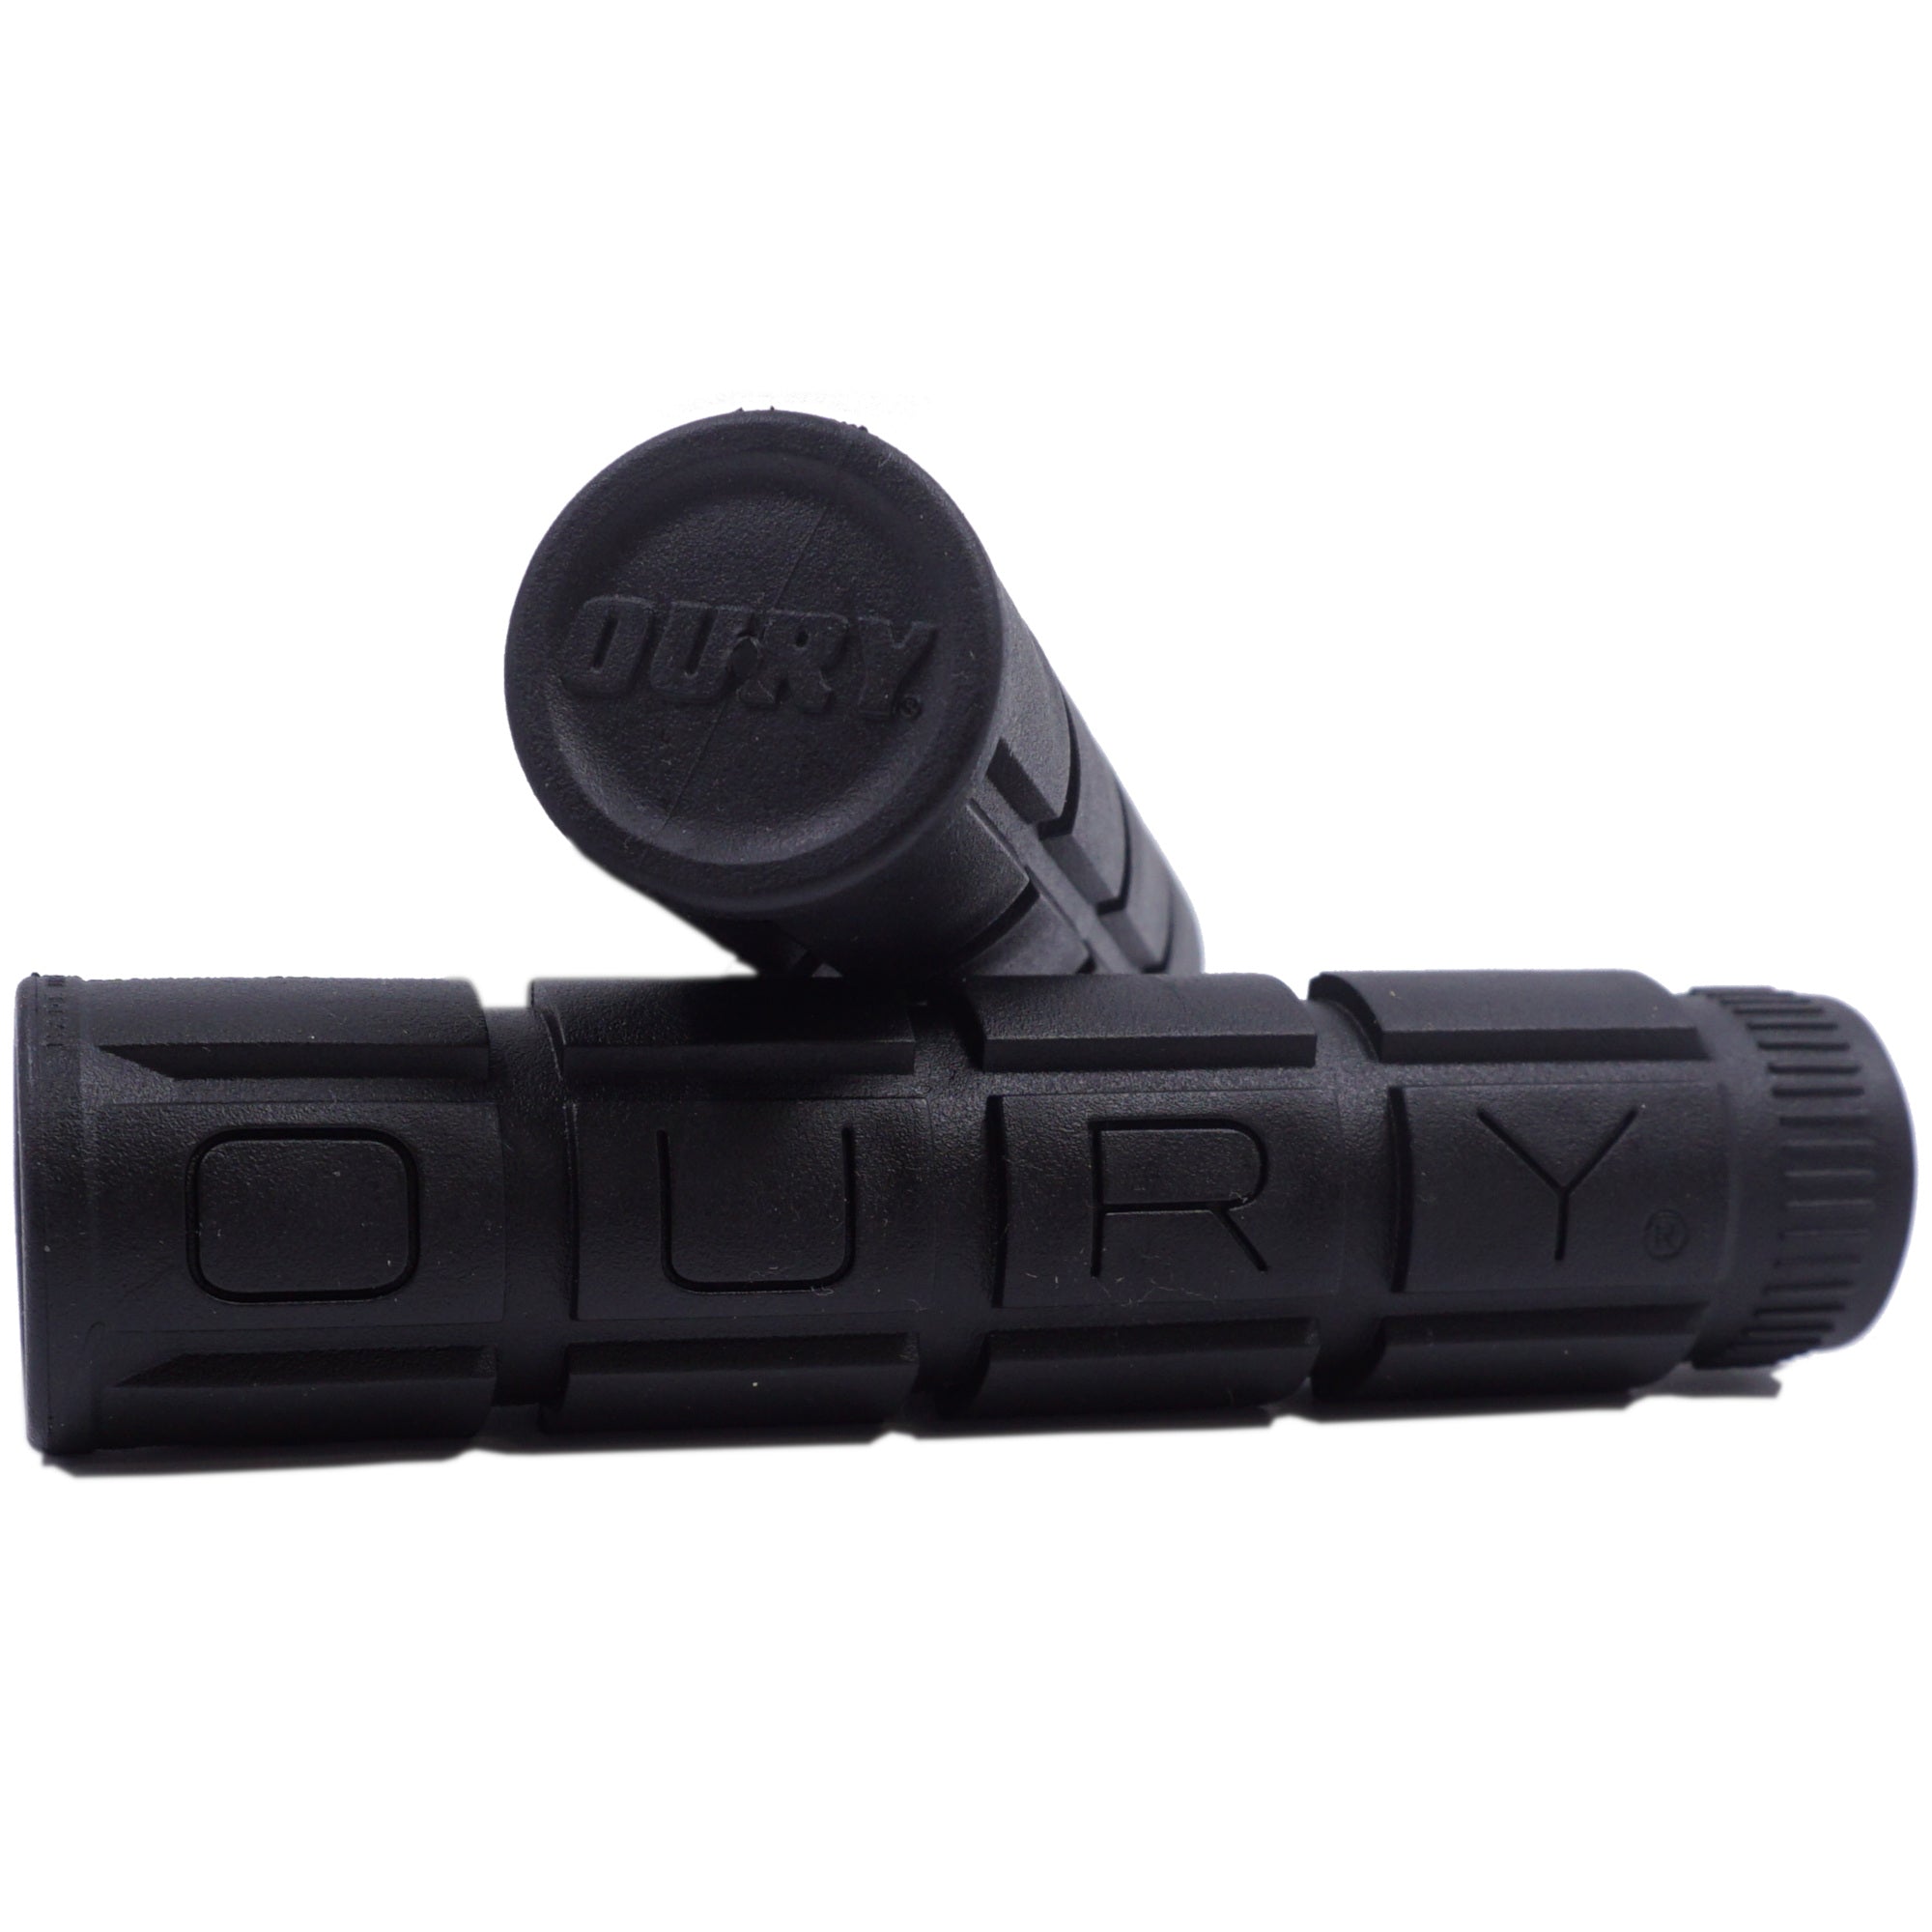 Oury V2 Single-Ply ATB Grips Flangeless - The Bikesmiths